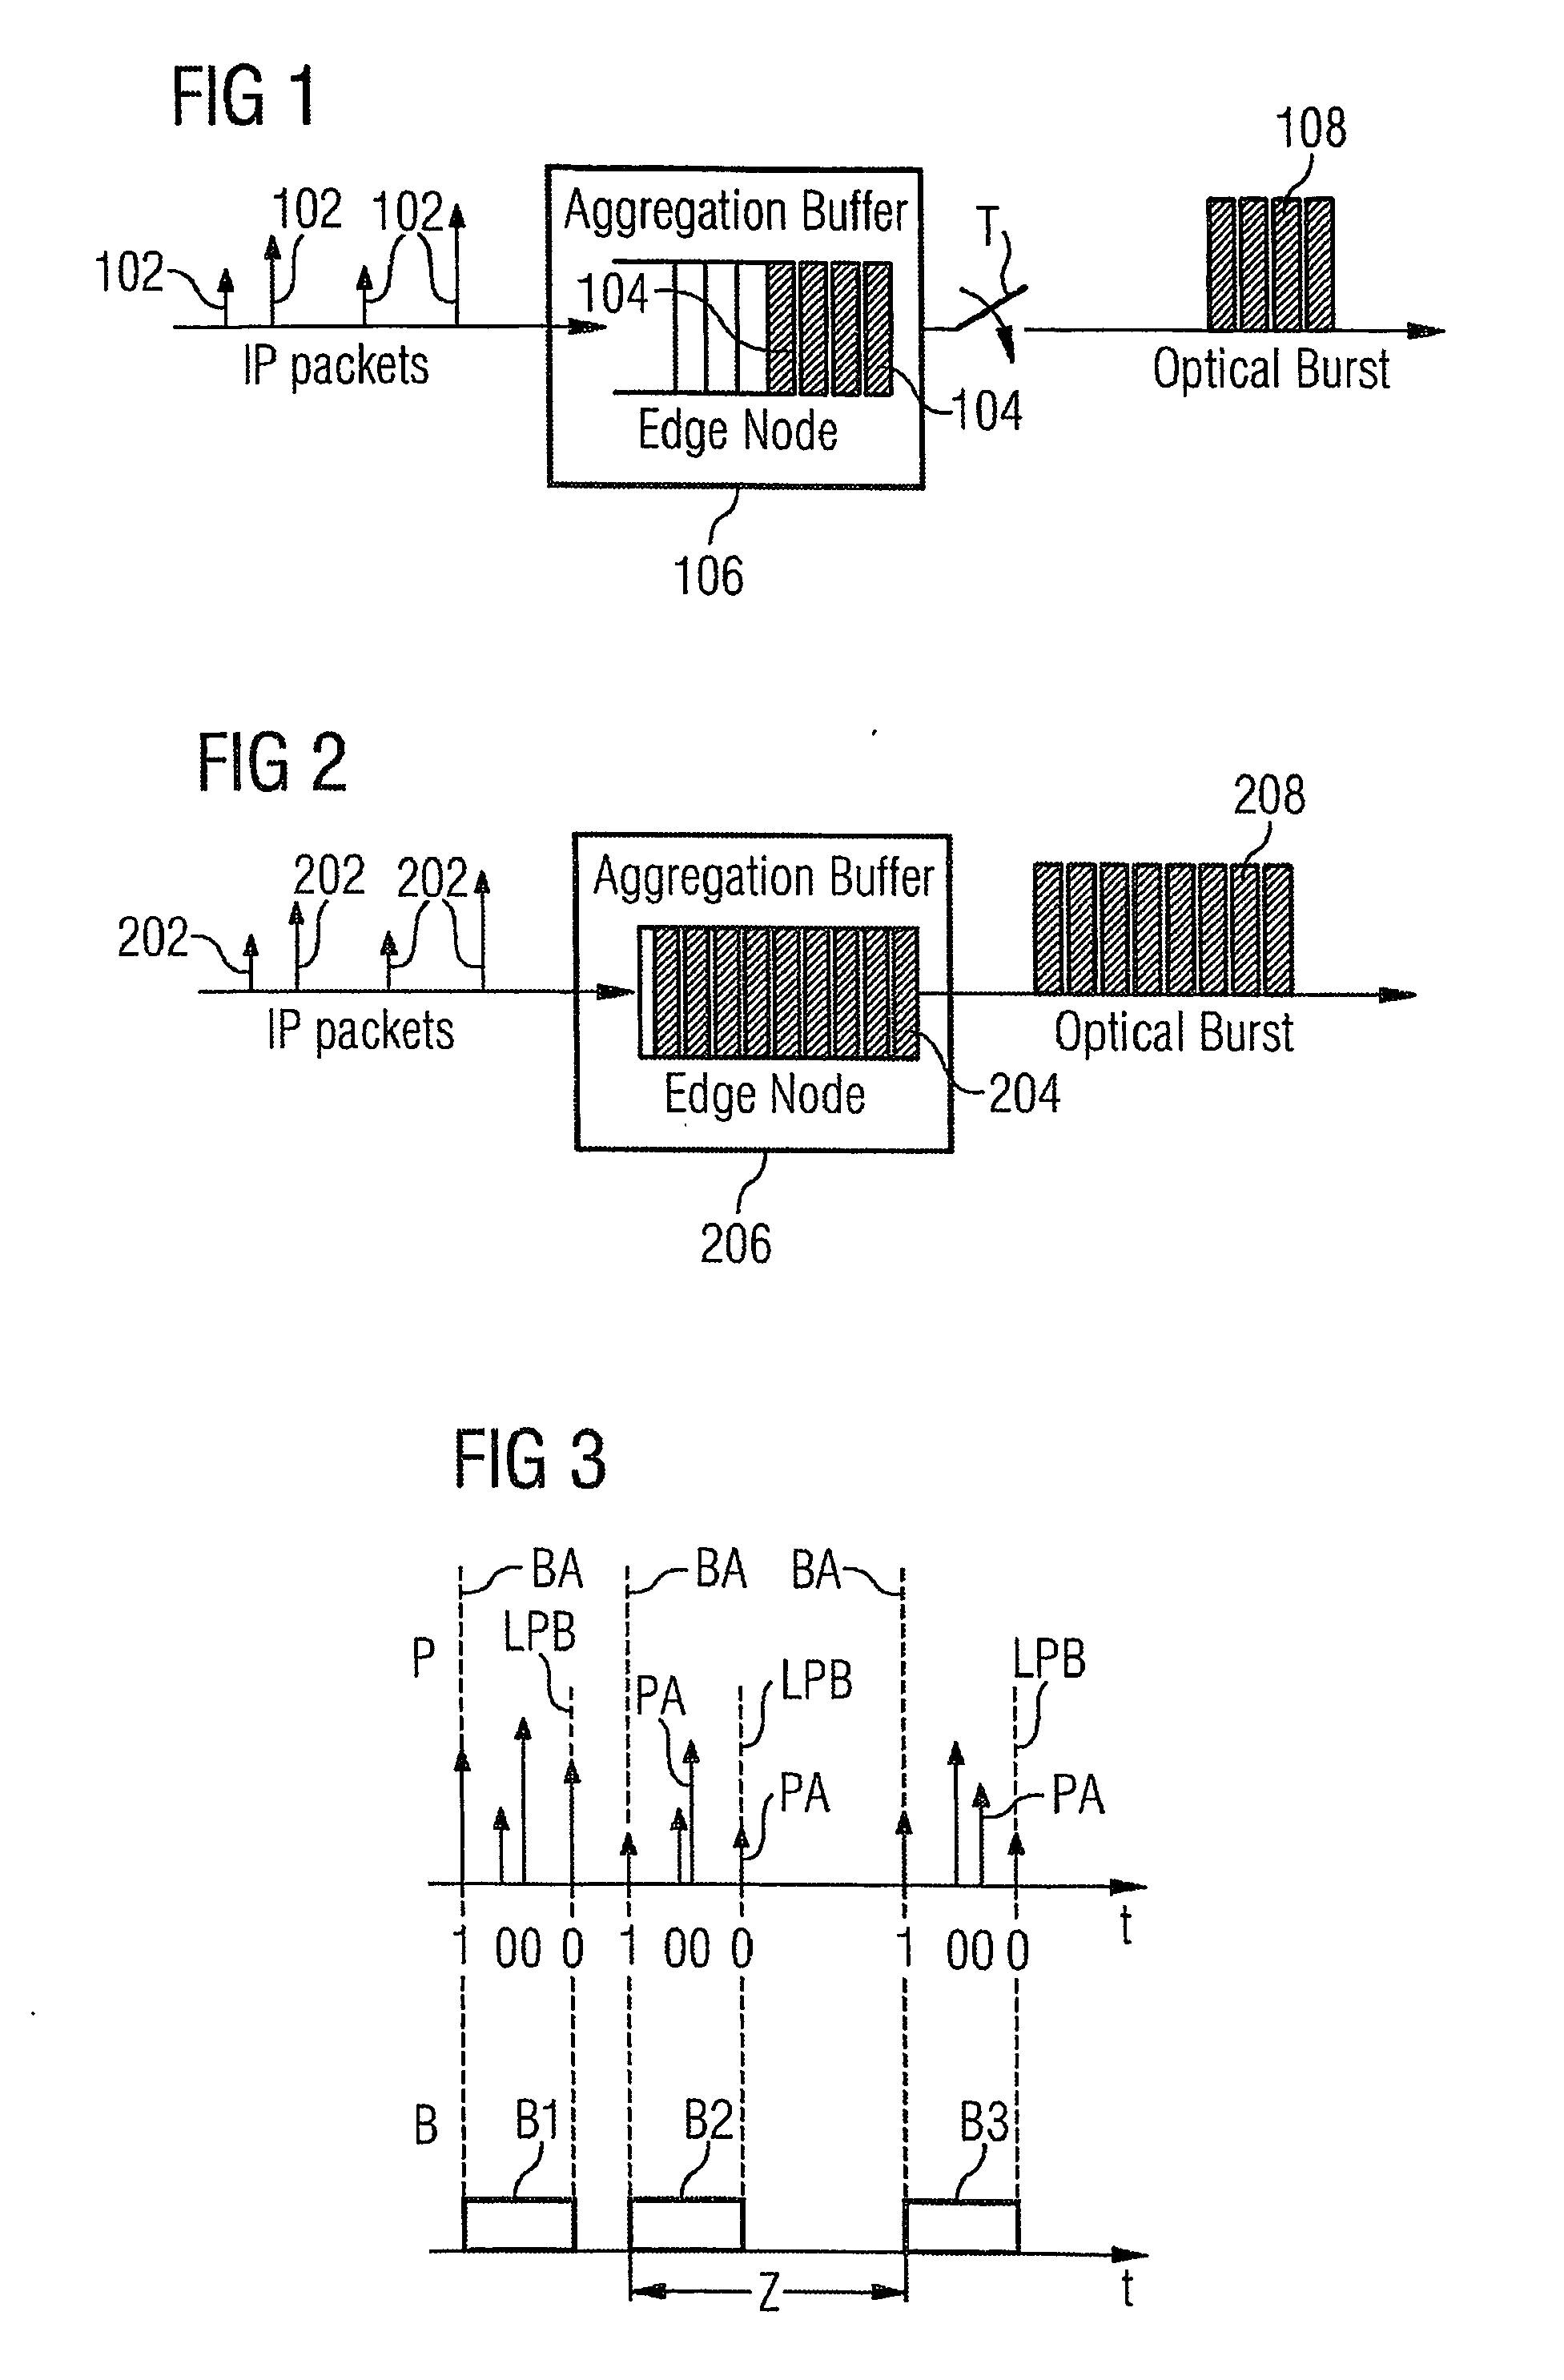 Method for and apparatus for aggregating incoming packets into optical for an optical burst switched network